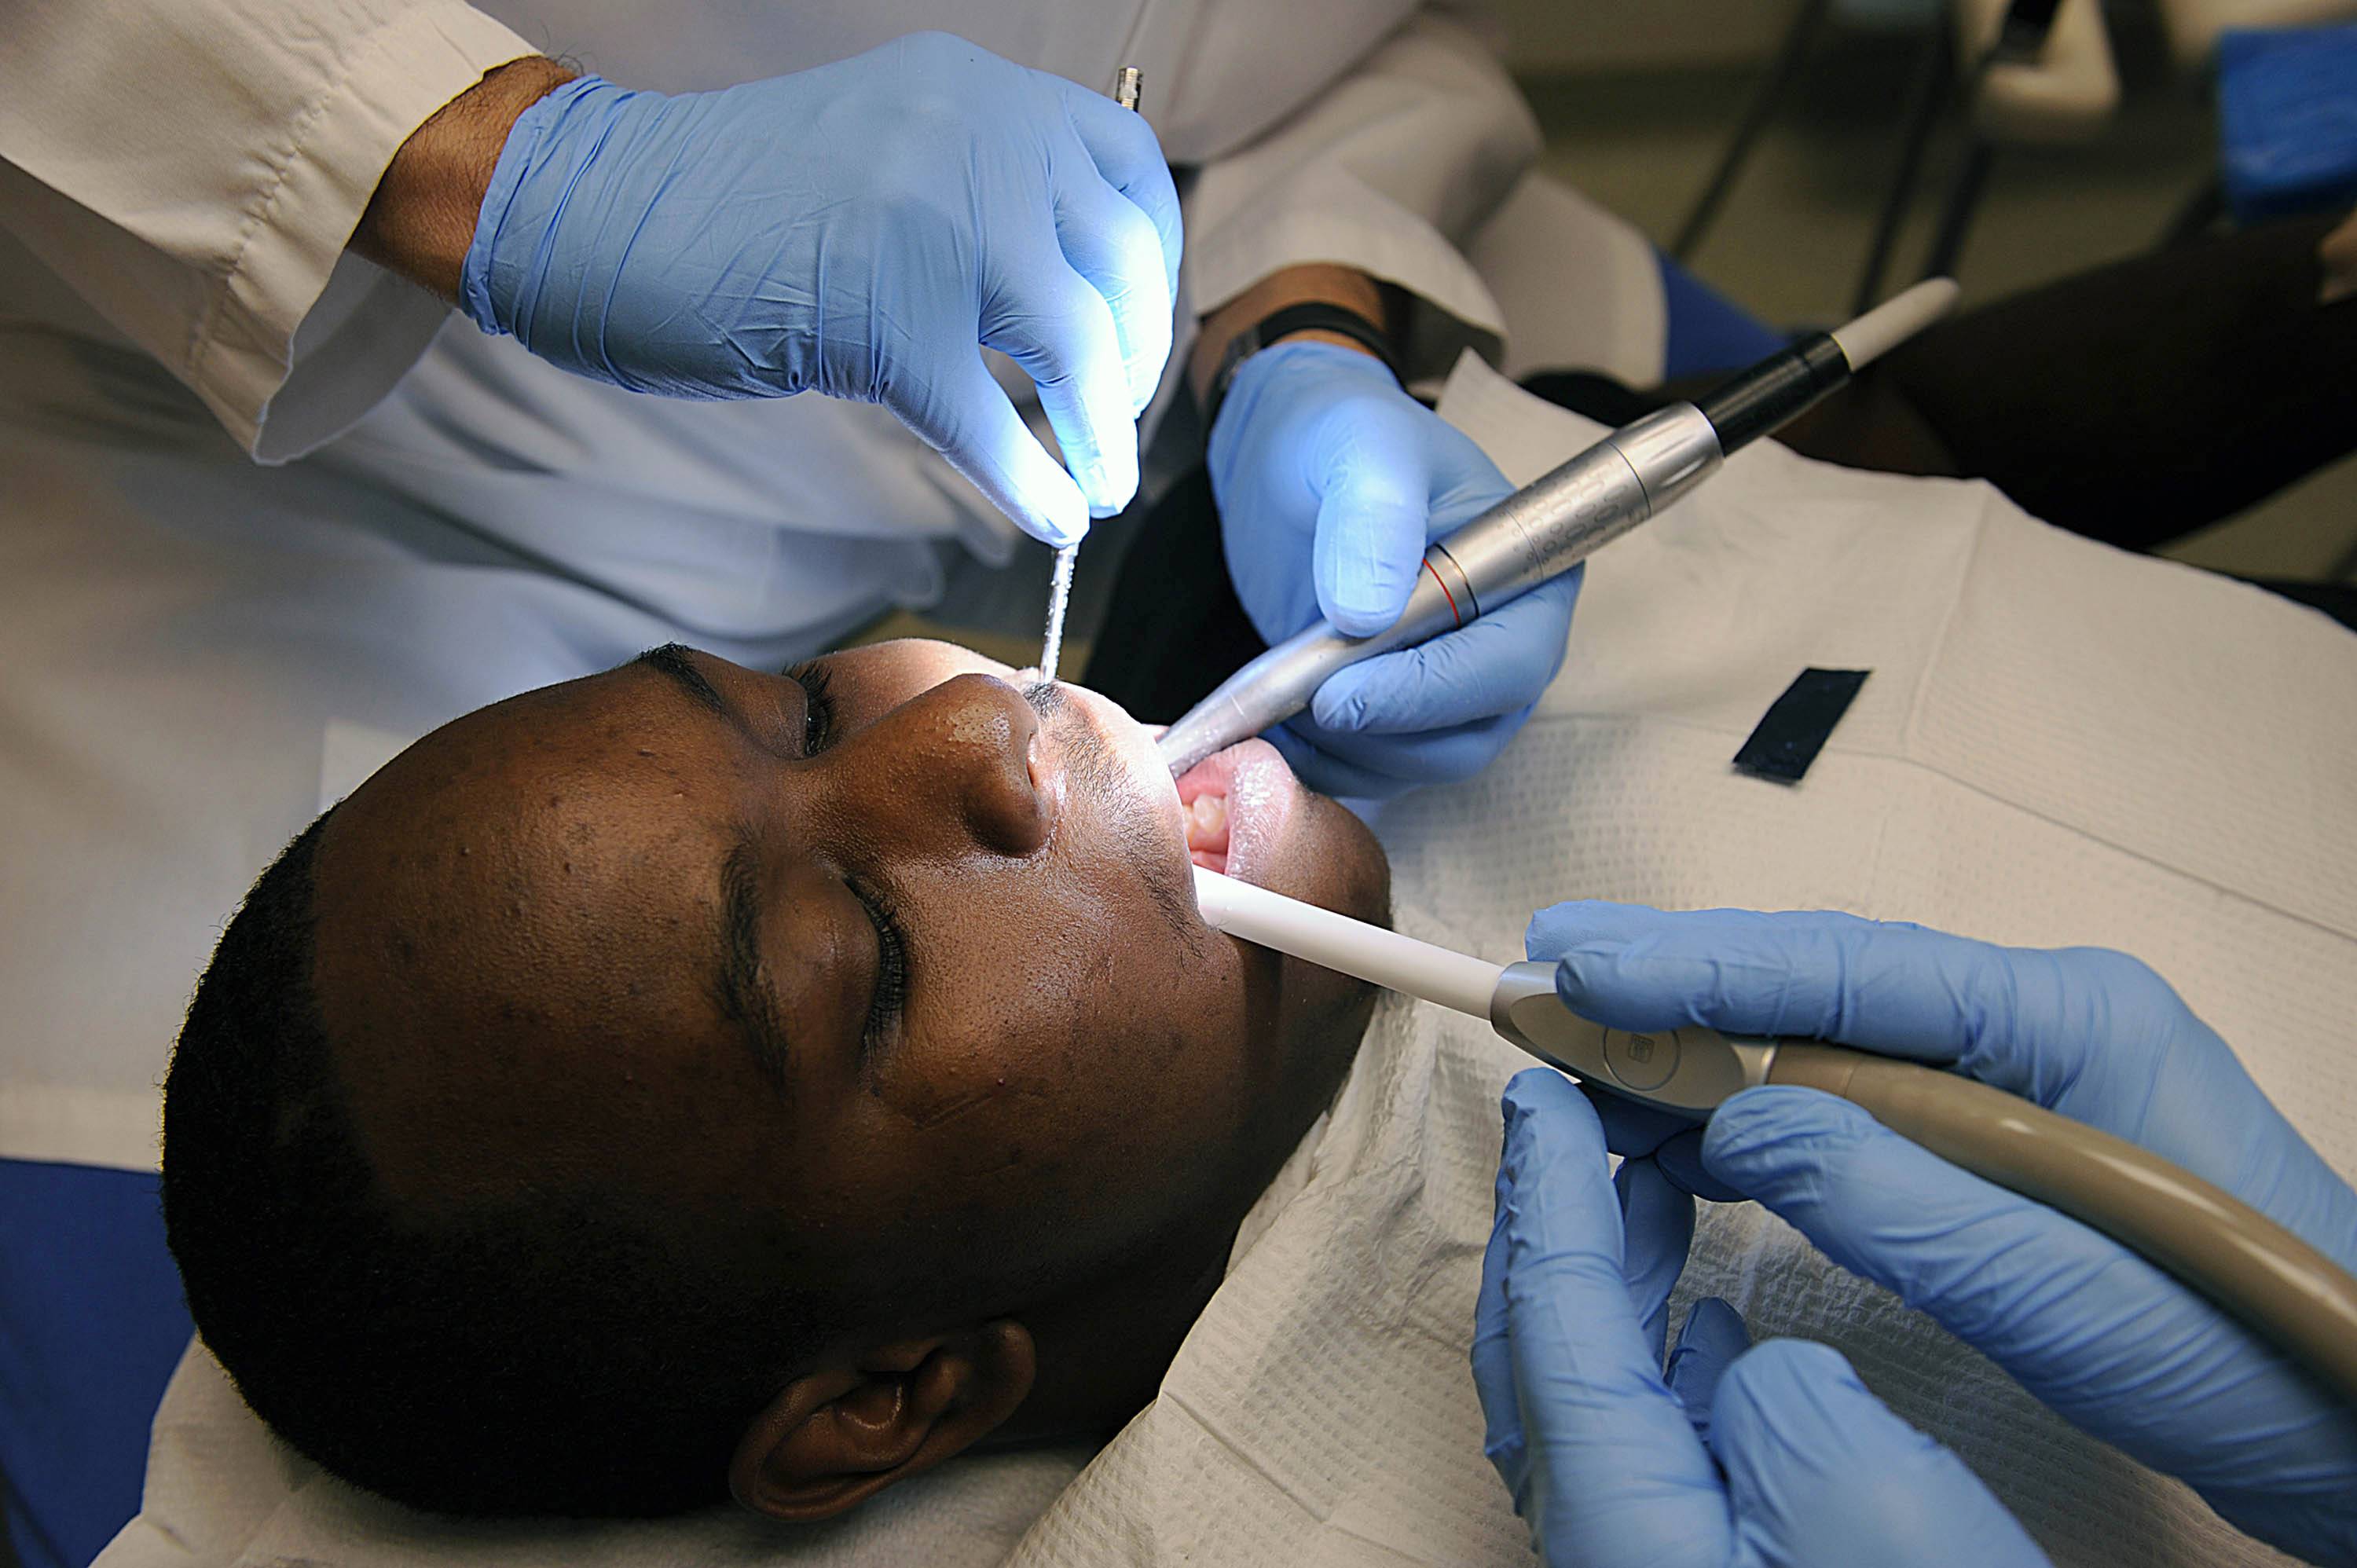 Blacks Are Less Likely to Receive Preventative Dental Care